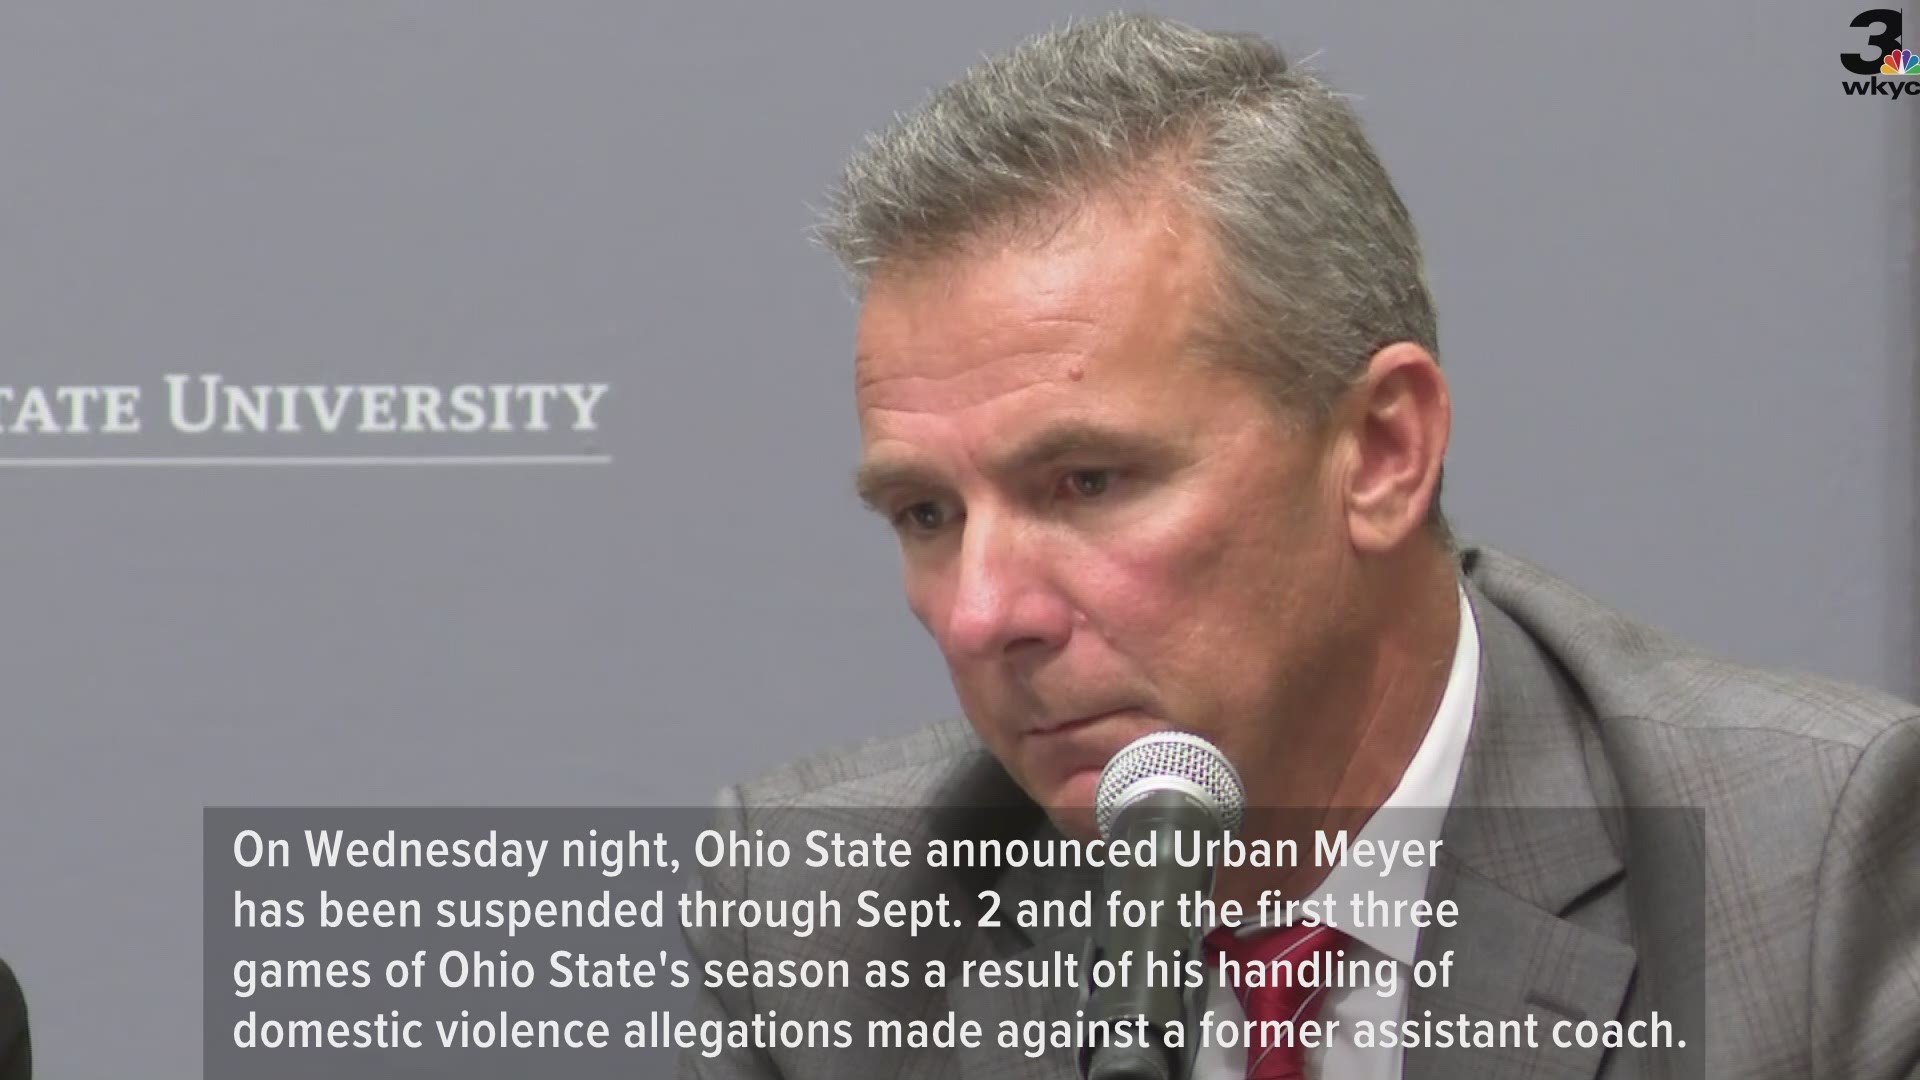 Ohio State announced Urban Meyer has been suspended